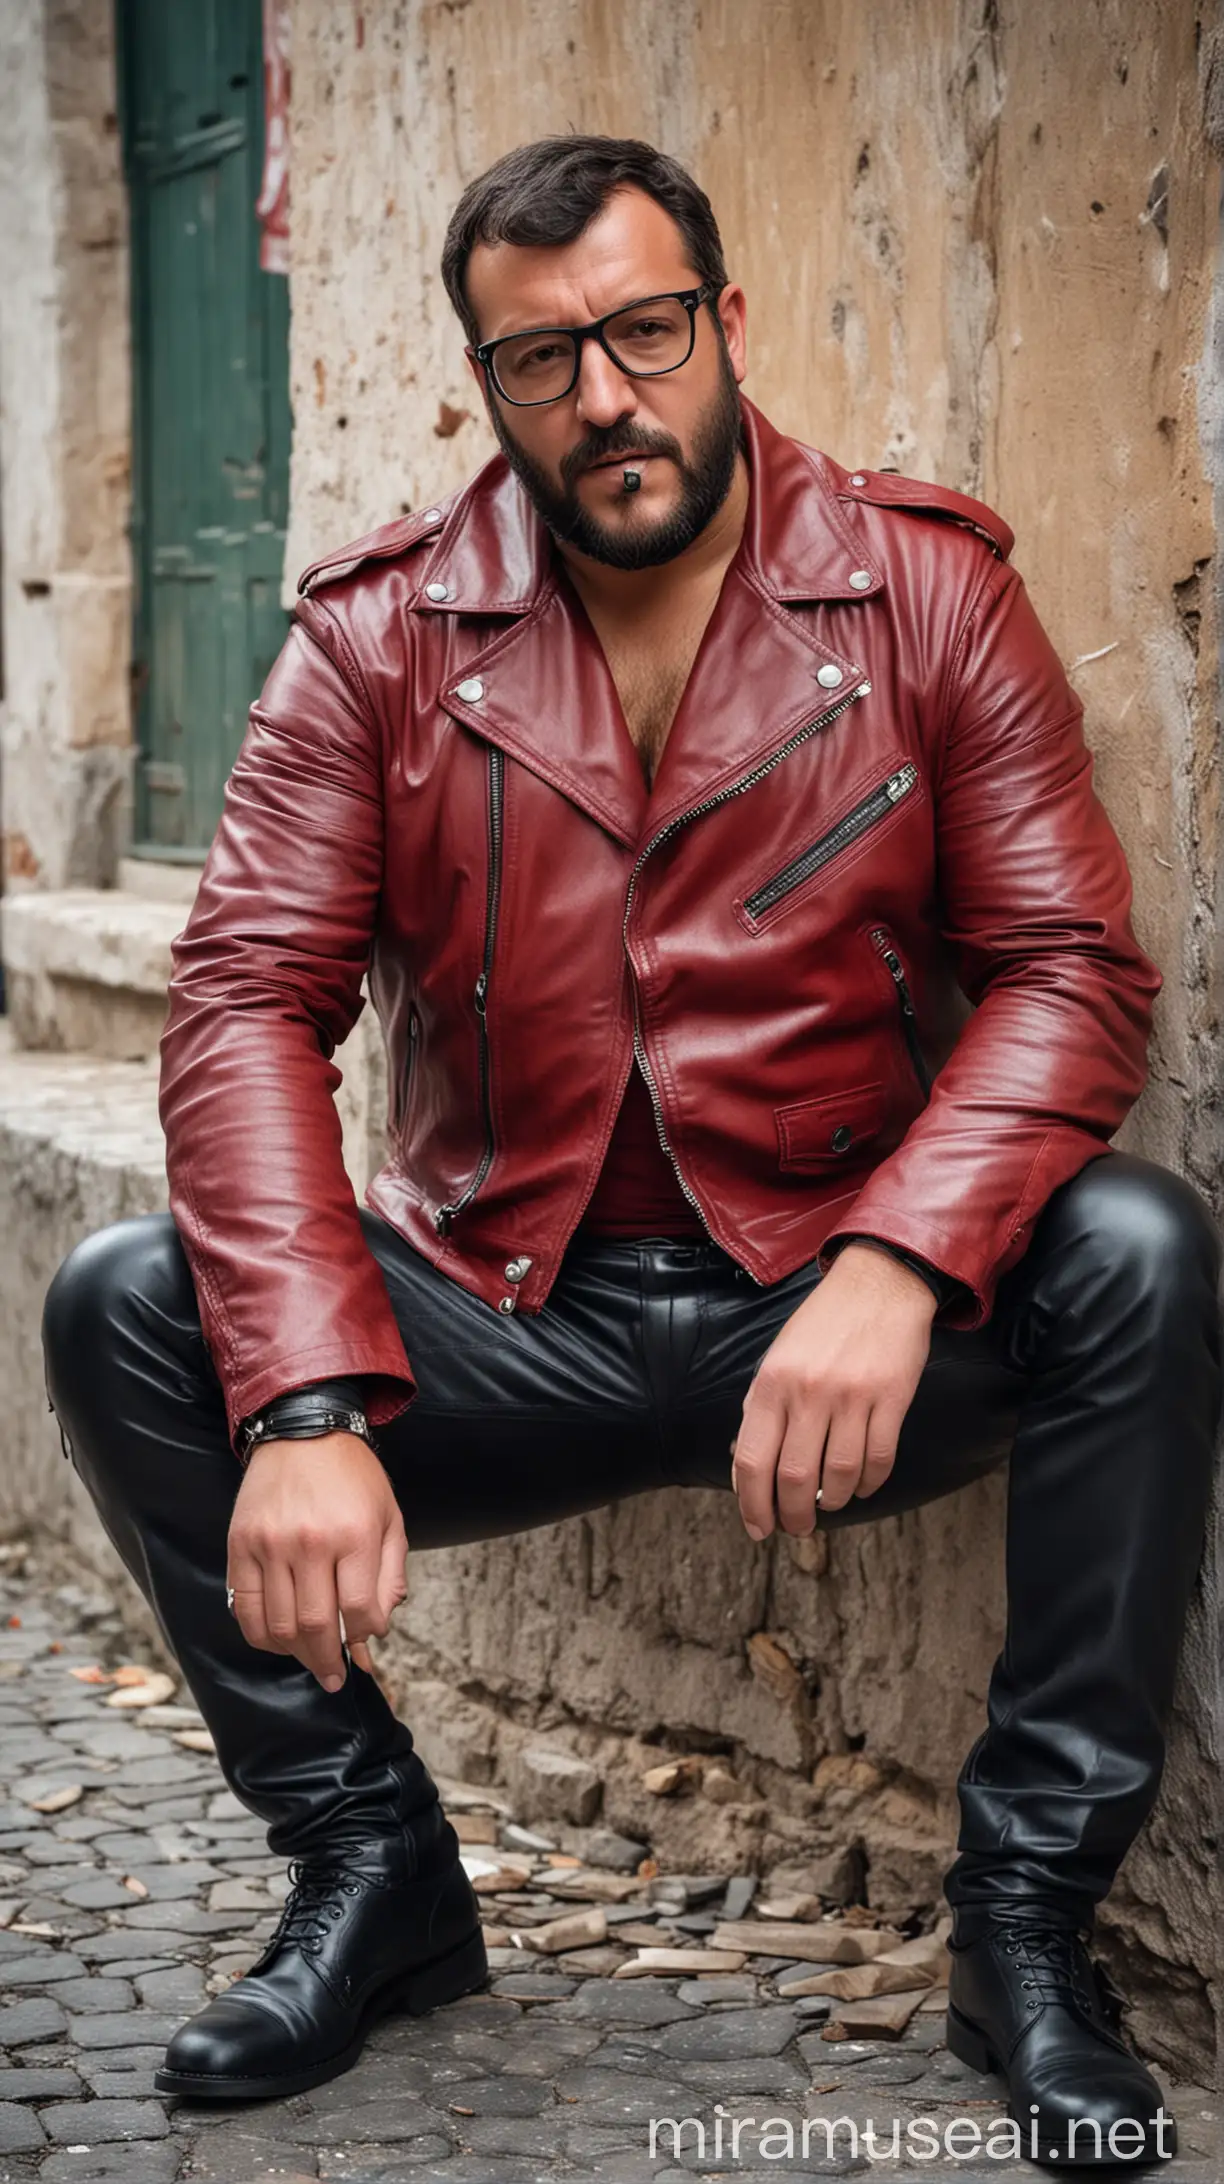 A thick manly muscled and bearded  with a thick bulge Matteo Salvini smoking a big cigar tight black leather jacket and very tight red leather pants biker style dressed wearing glasses crawling on his knees wearing glasses